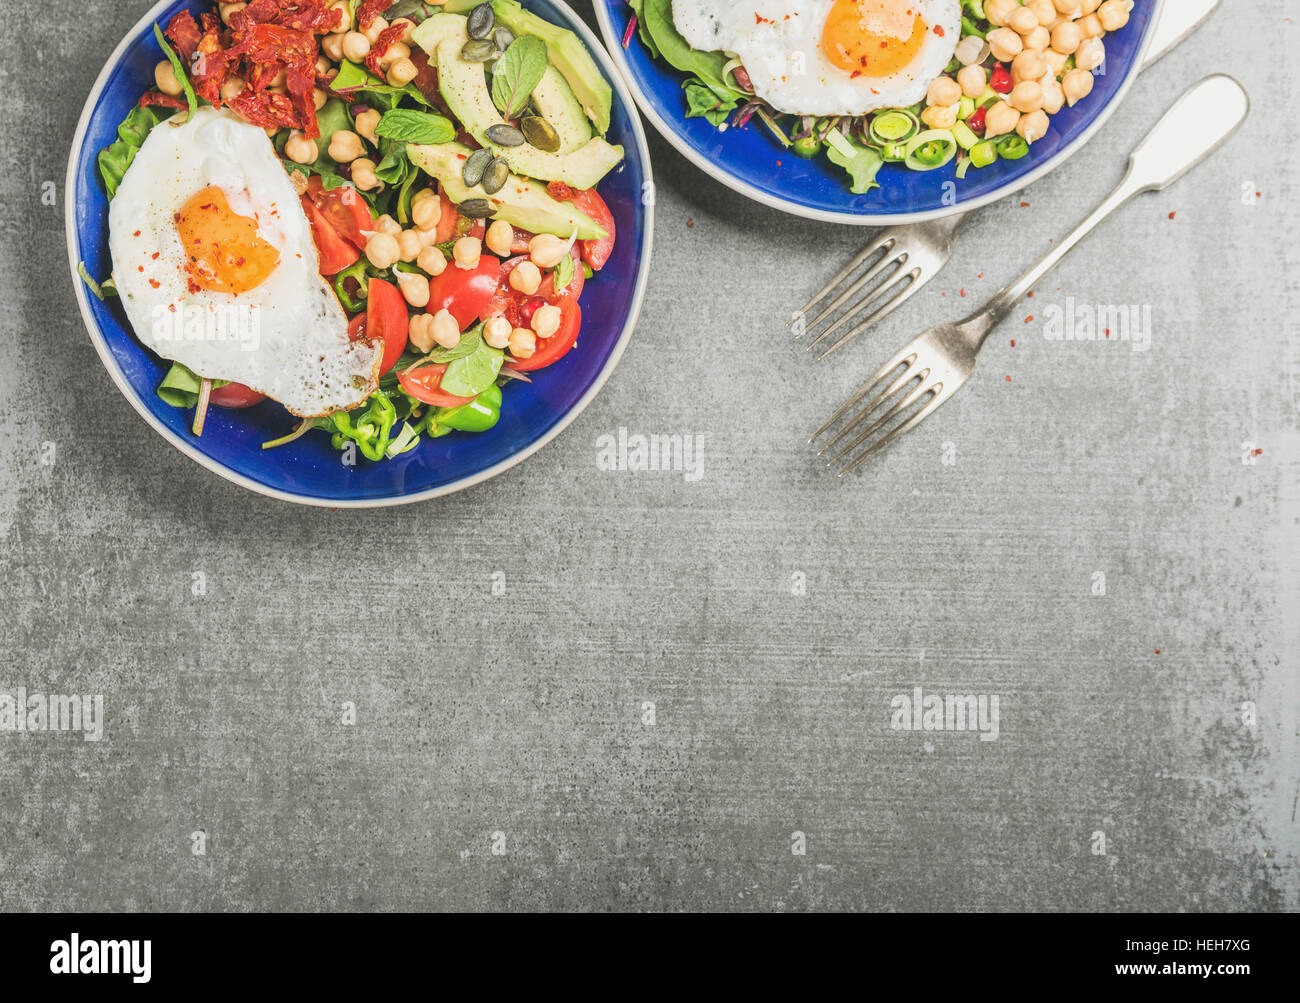 Healthy breakfast with fried egg, chickpea sprouts, seeds, vegetables and greens in blue ceramic bowls over grey concrete background, top view, copy s Stock Photo